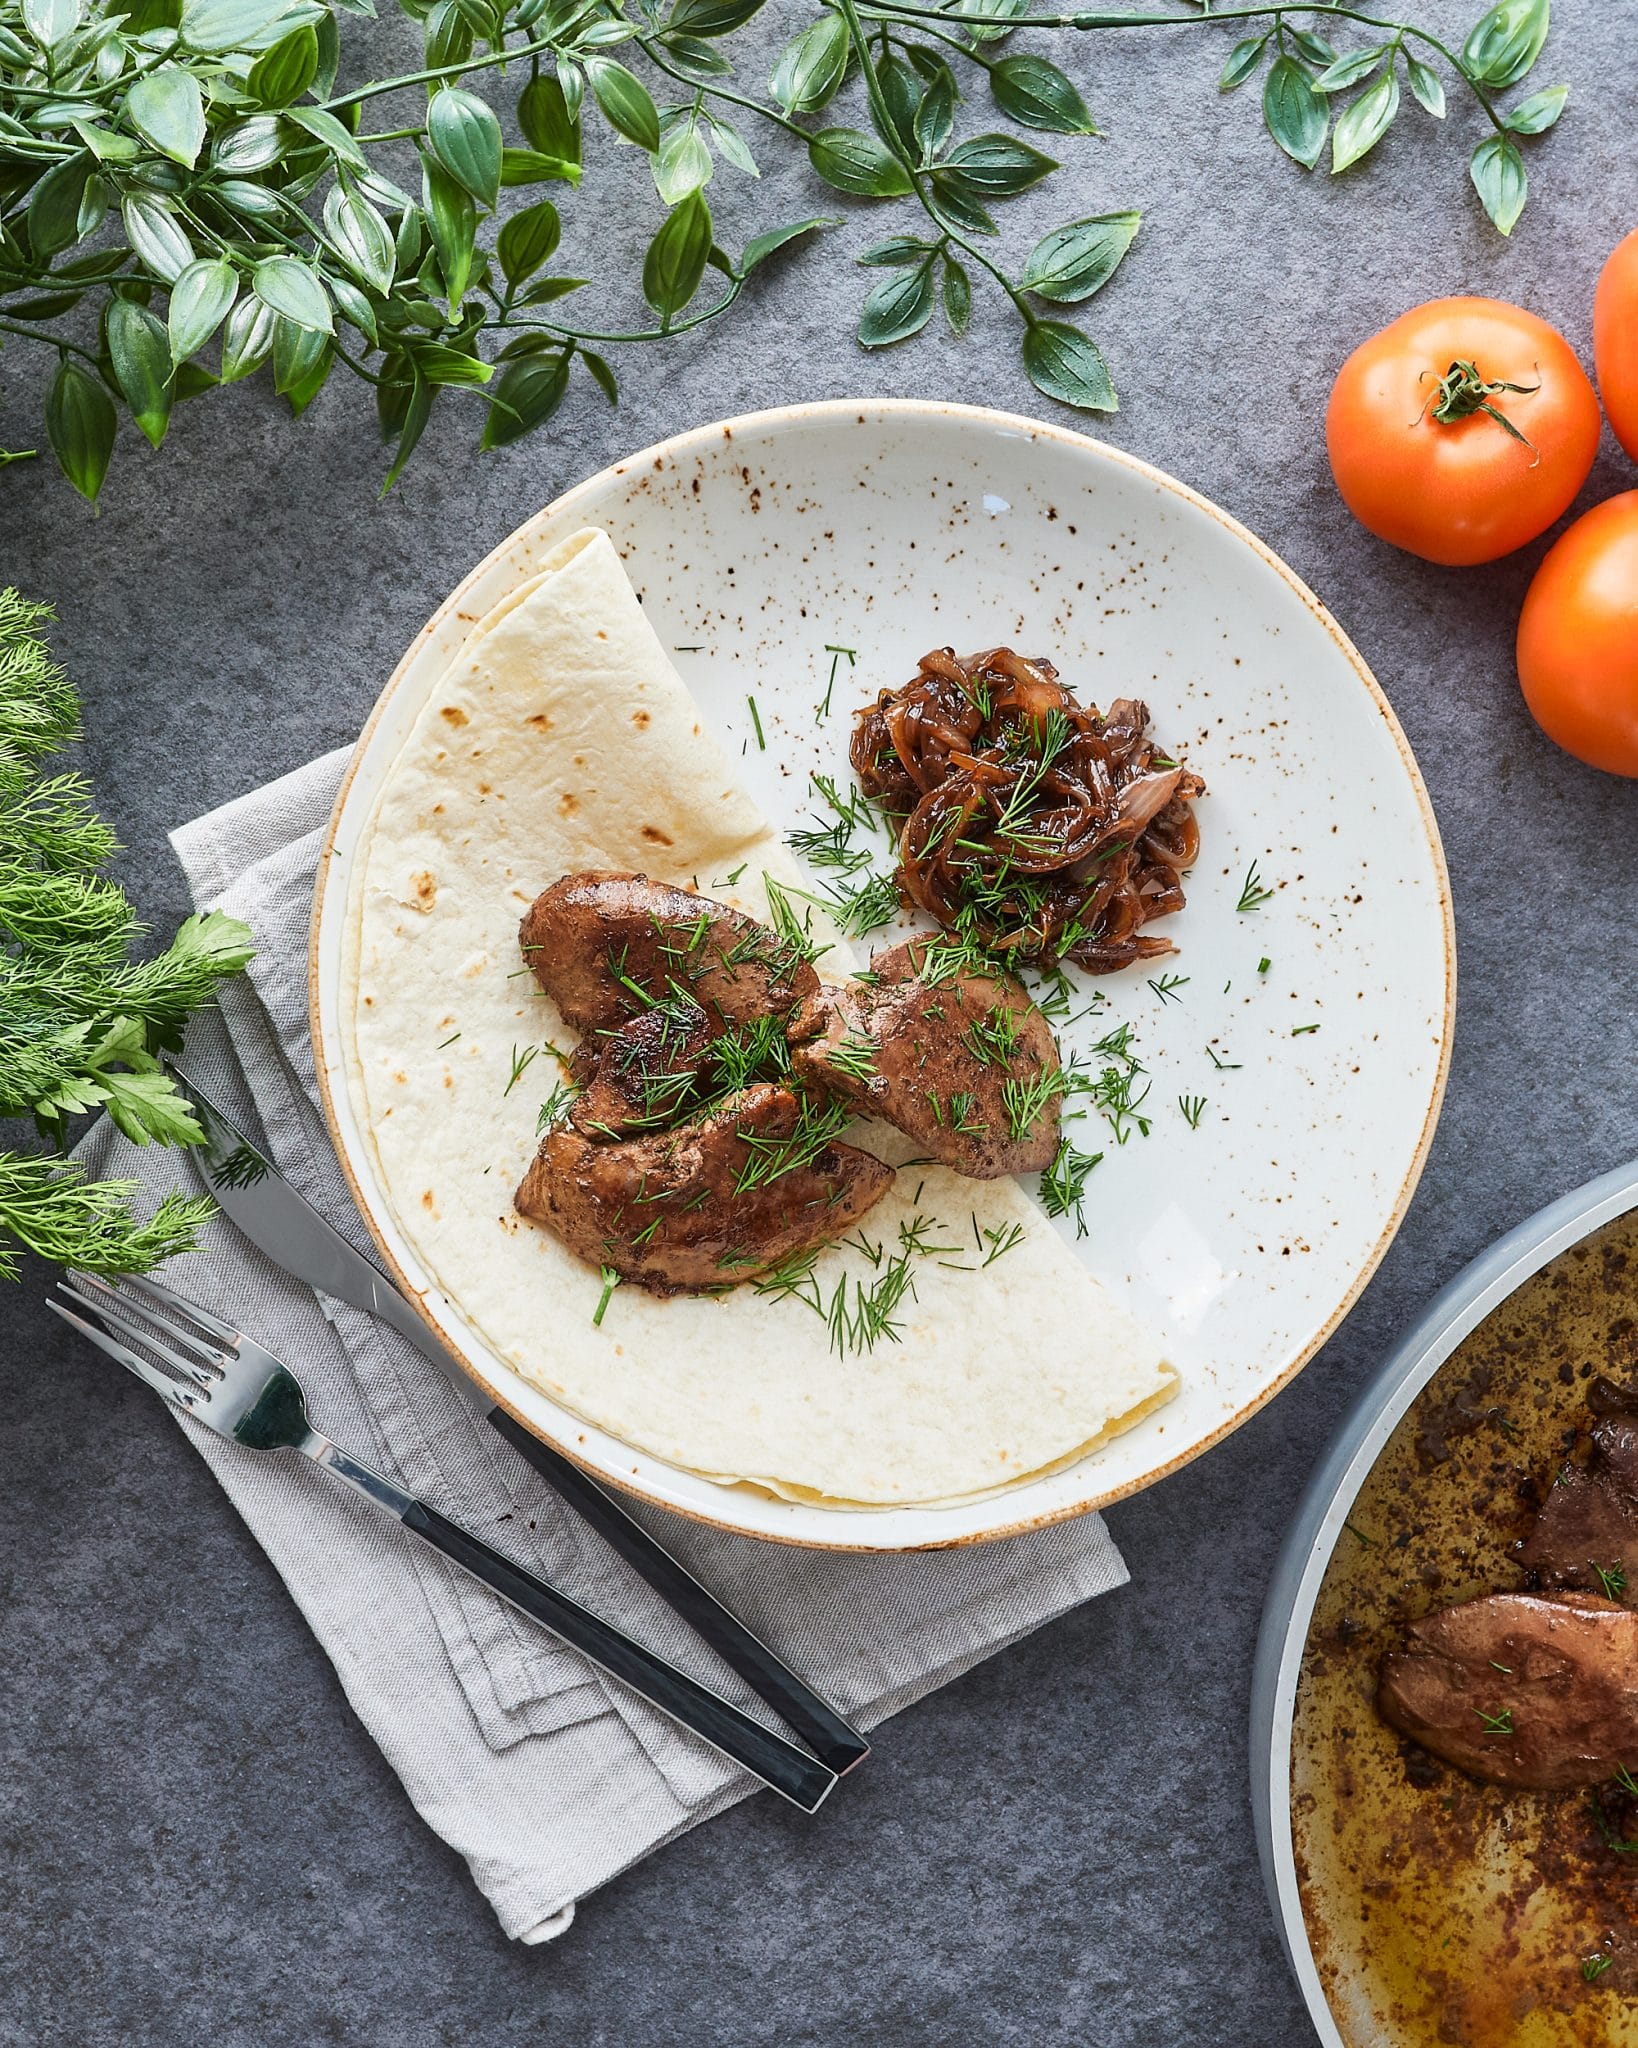 Pan-fried Turkey Liver with Caramelized Onions